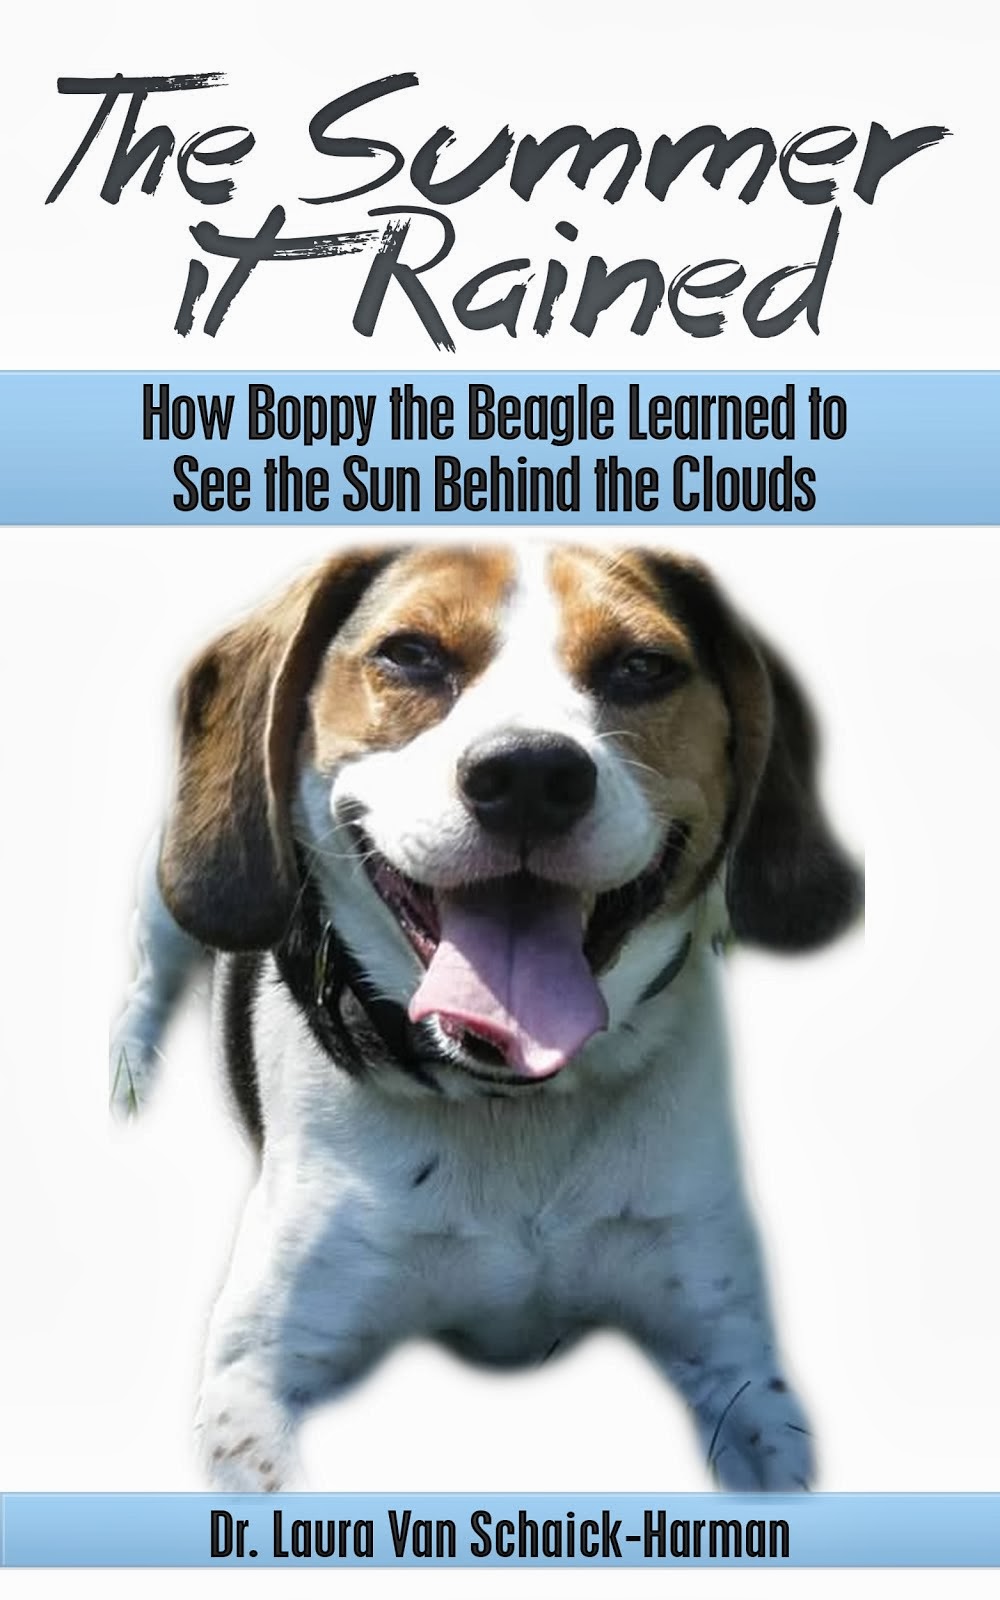 The Summer it Rained: How Boppy the Beagle Learned to See the Sun Behind the Clouds